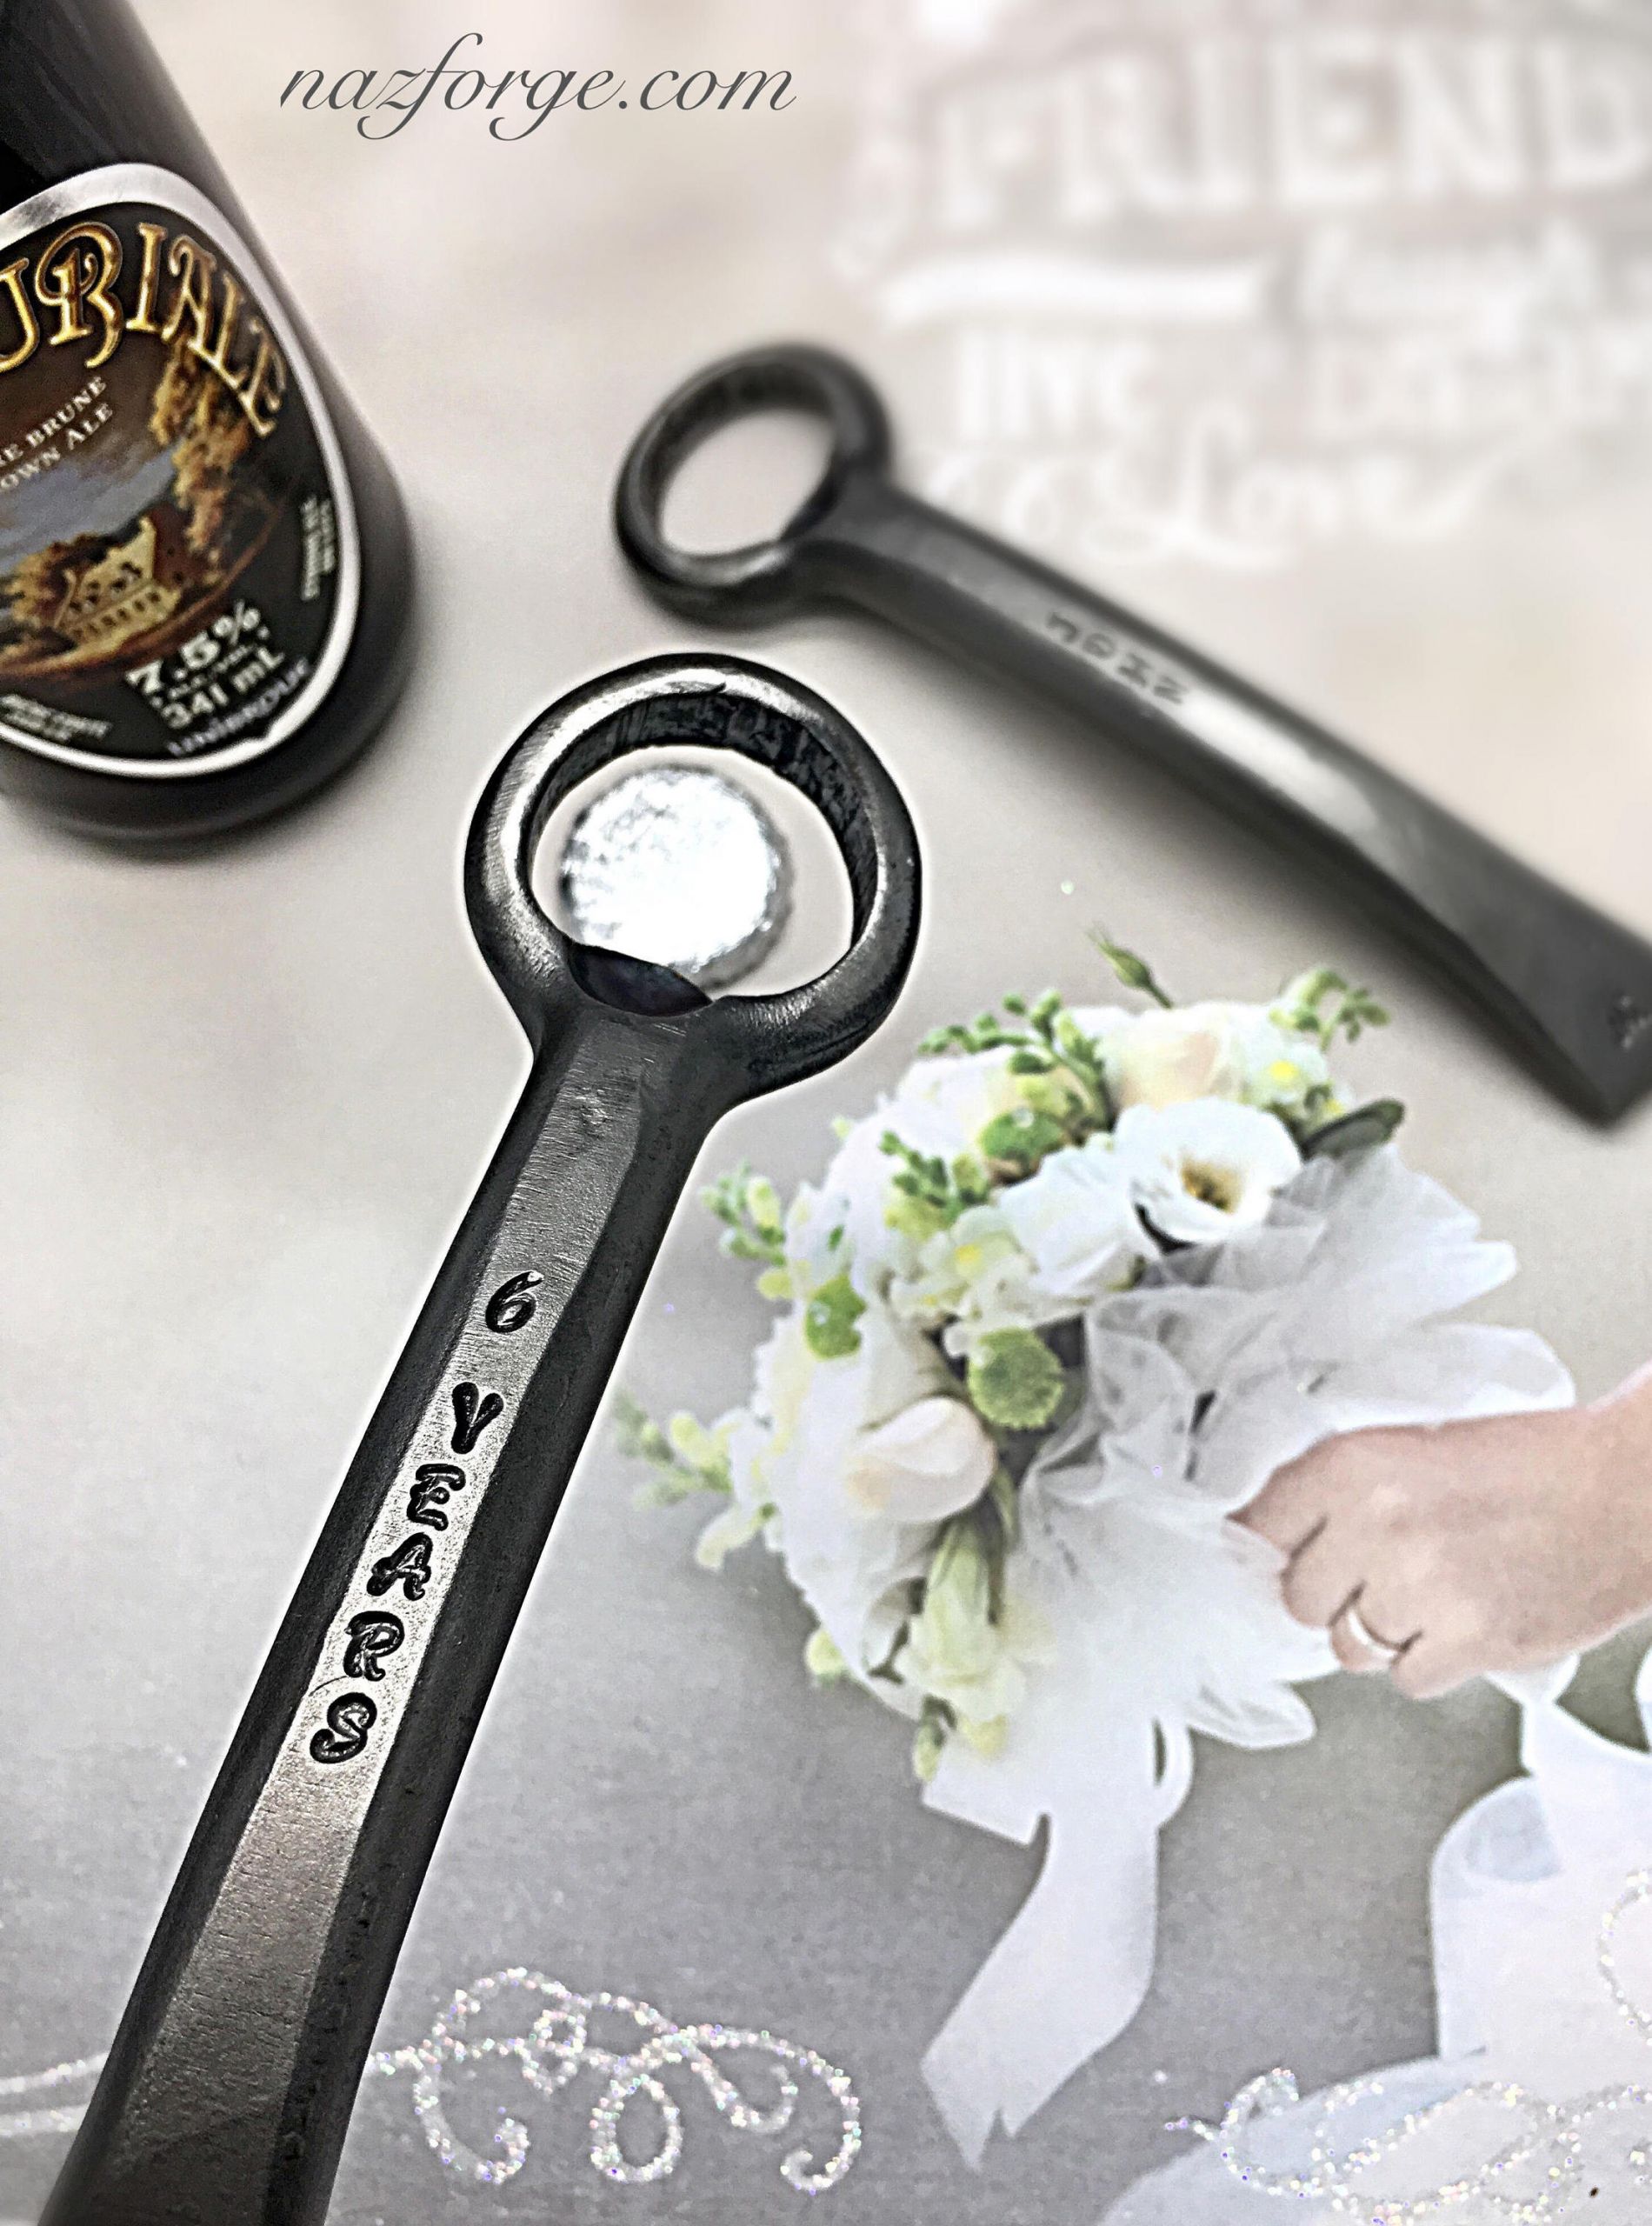 6Th Wedding Anniversary Gift Ideas For Her
 6th Year Iron Wedding Anniversary Gift Bottle Opener 6